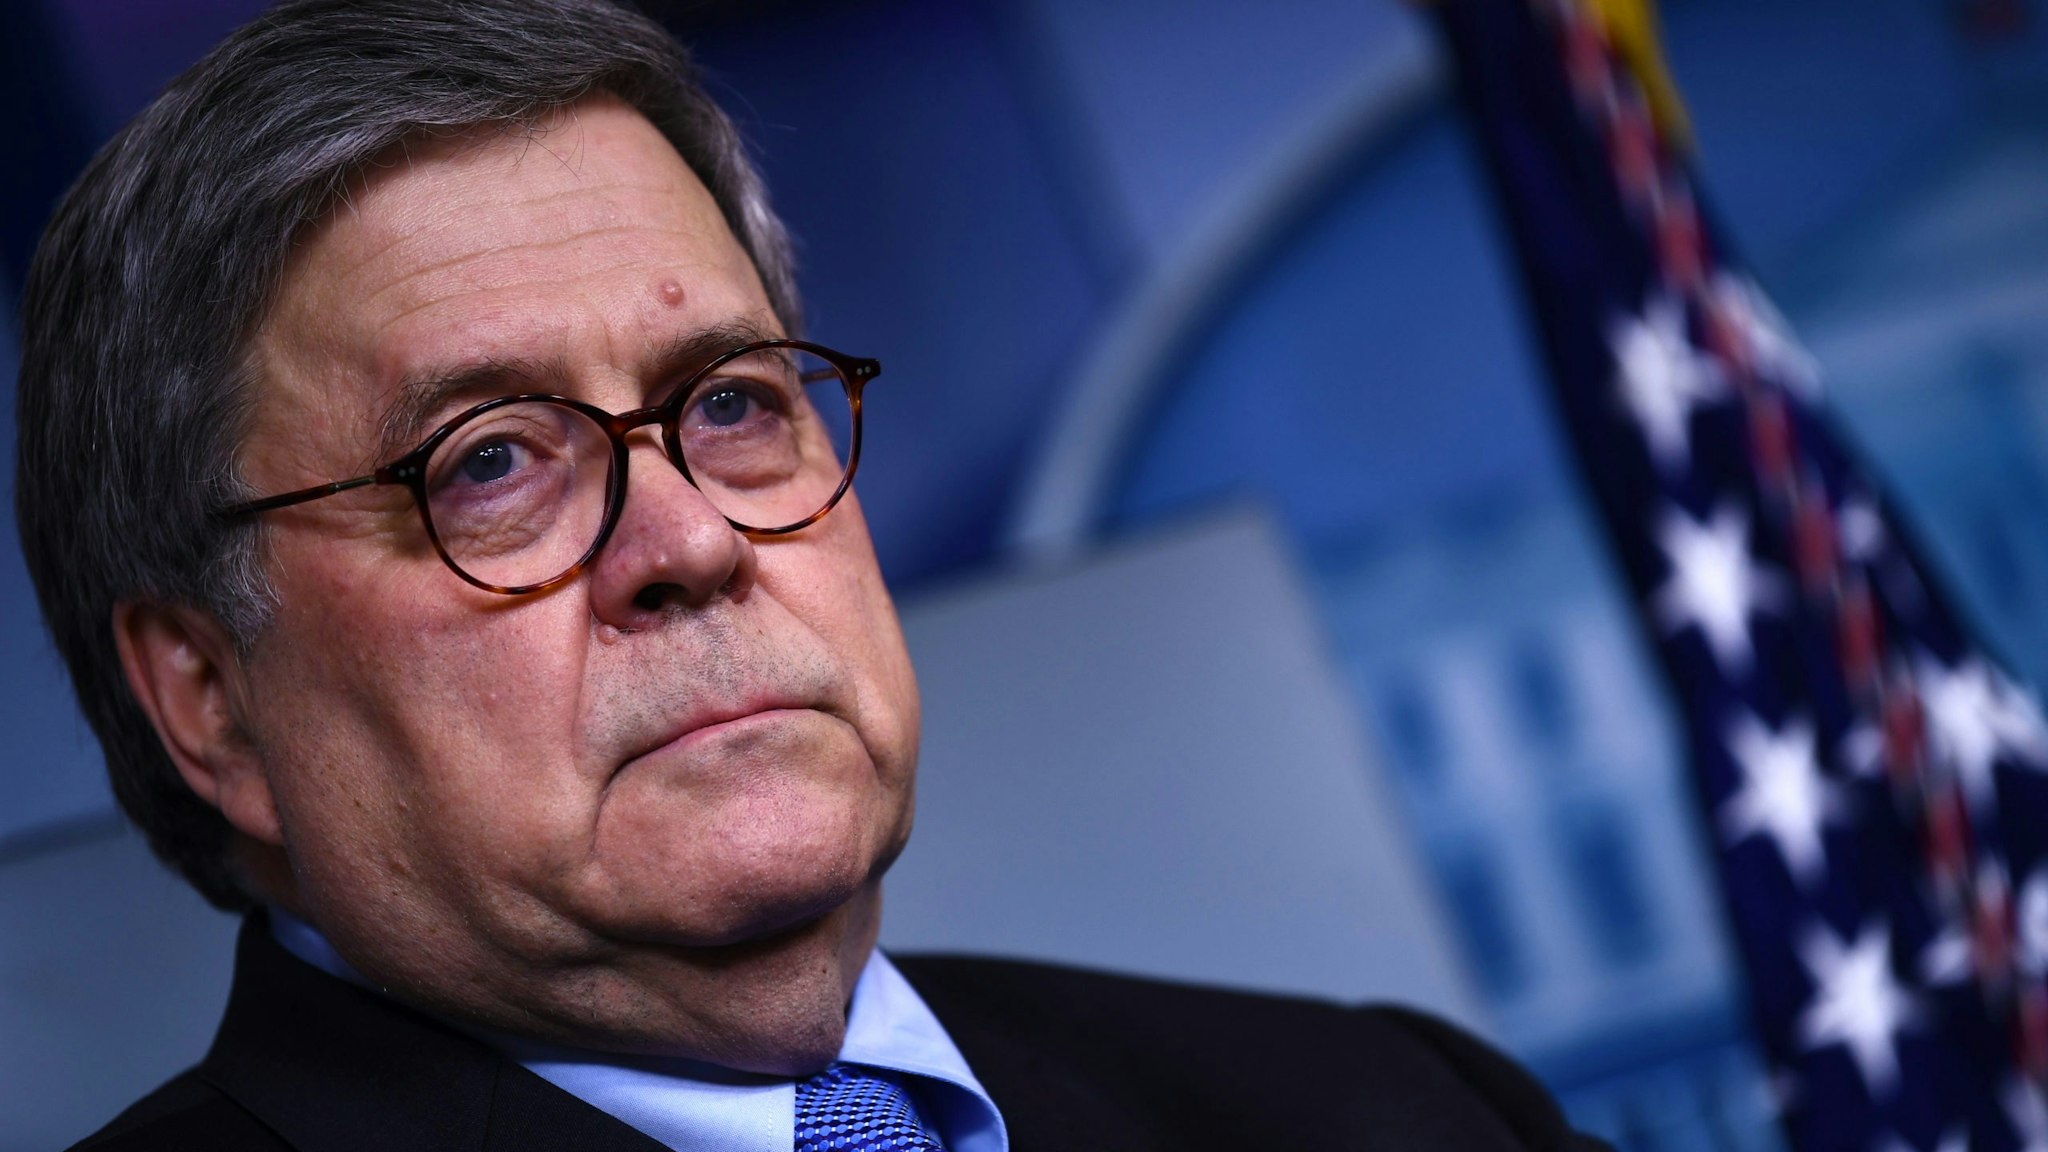 Attorney General William Barr waits in the press briefing room of the White House March 23, 2020, in Washington, DC.